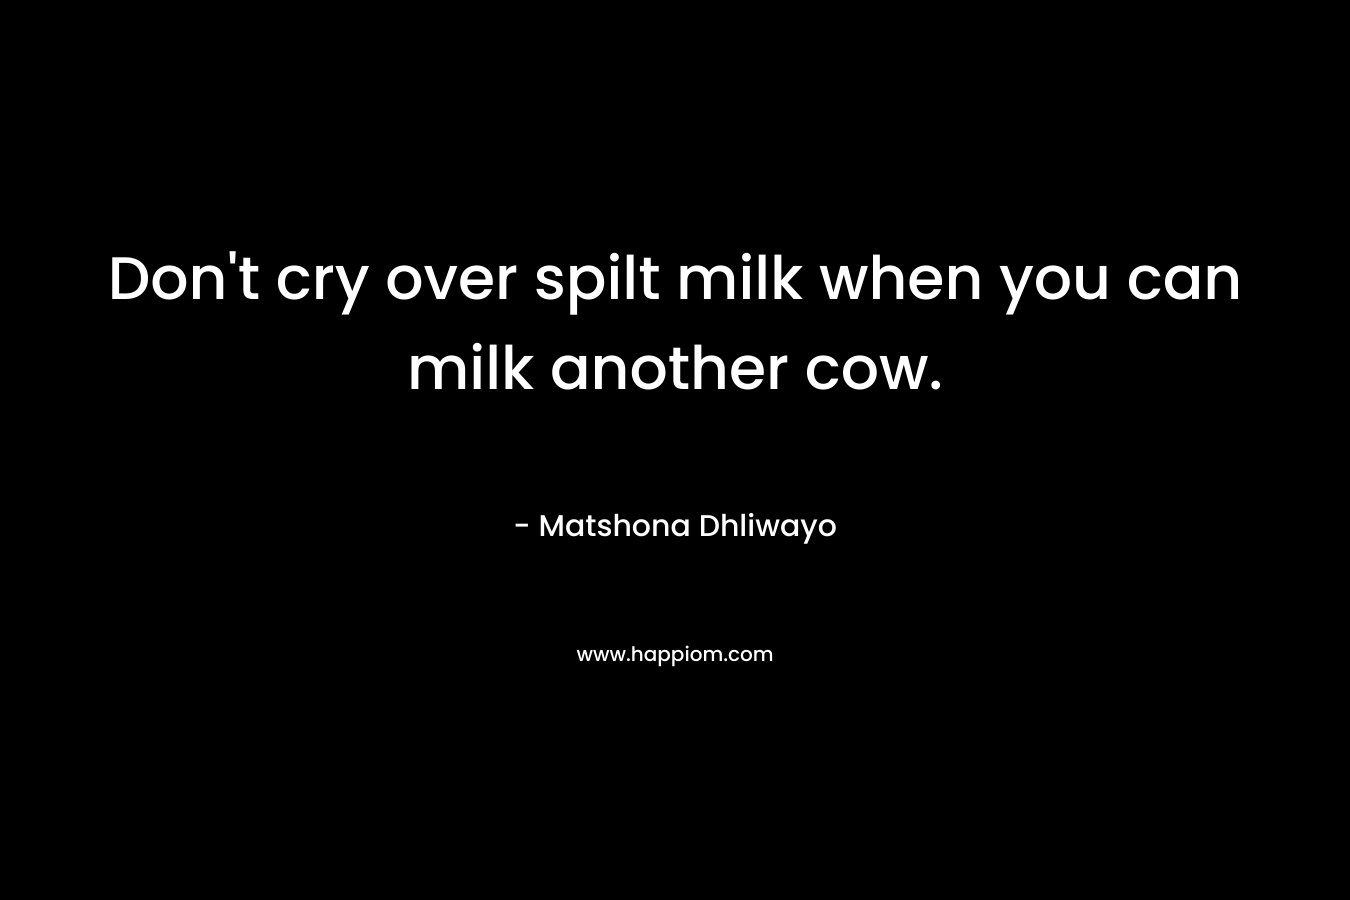 Don't cry over spilt milk when you can milk another cow.